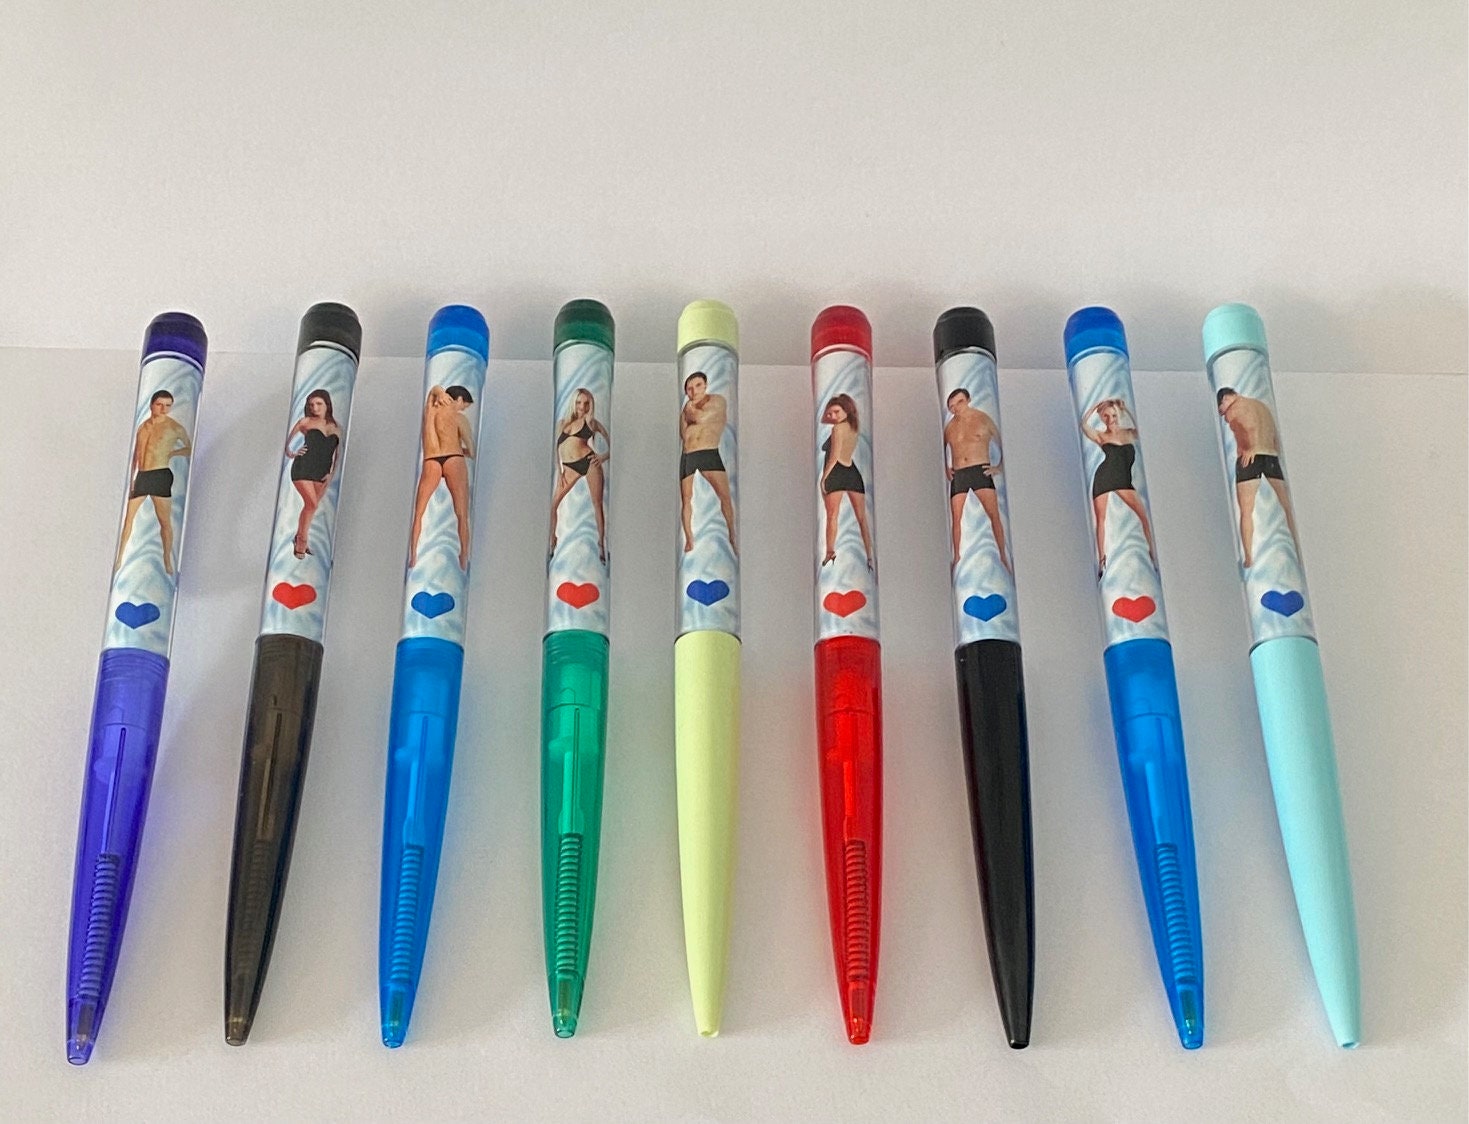 Naughty Floaty Souvenir Pen Male Strippers Collectable Tourist Vintage  Animated Ball-Point